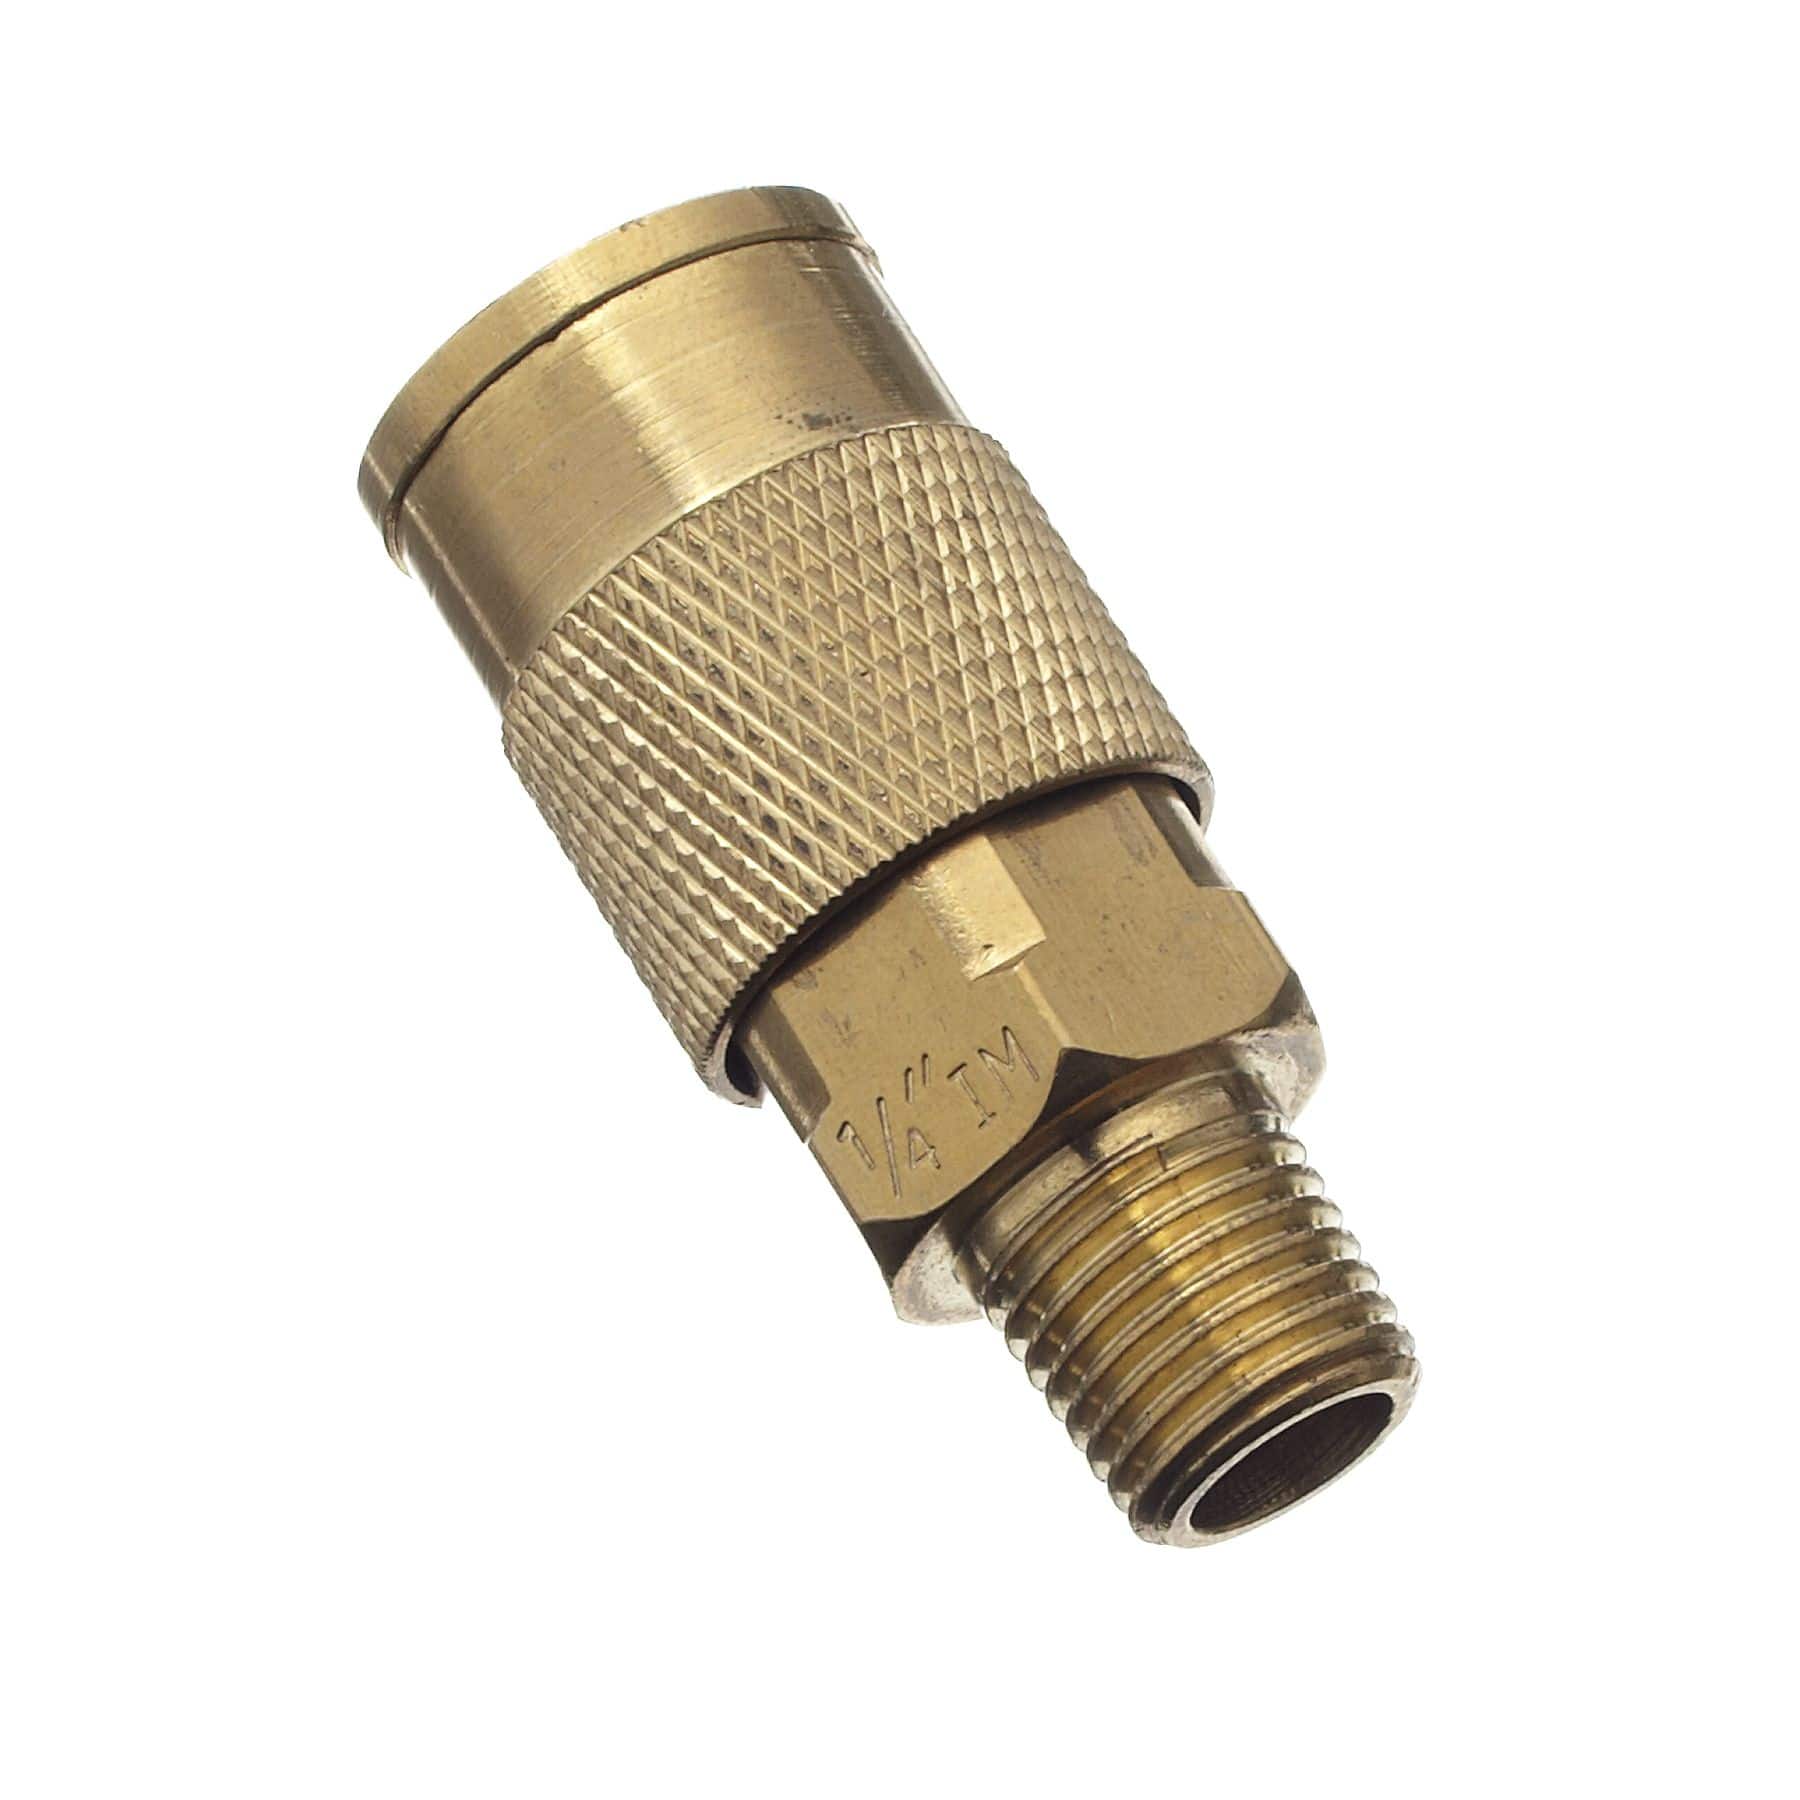 Mastercraft Brass Quick Male Air Compressor Connect Coupler, 1/4-in NPT